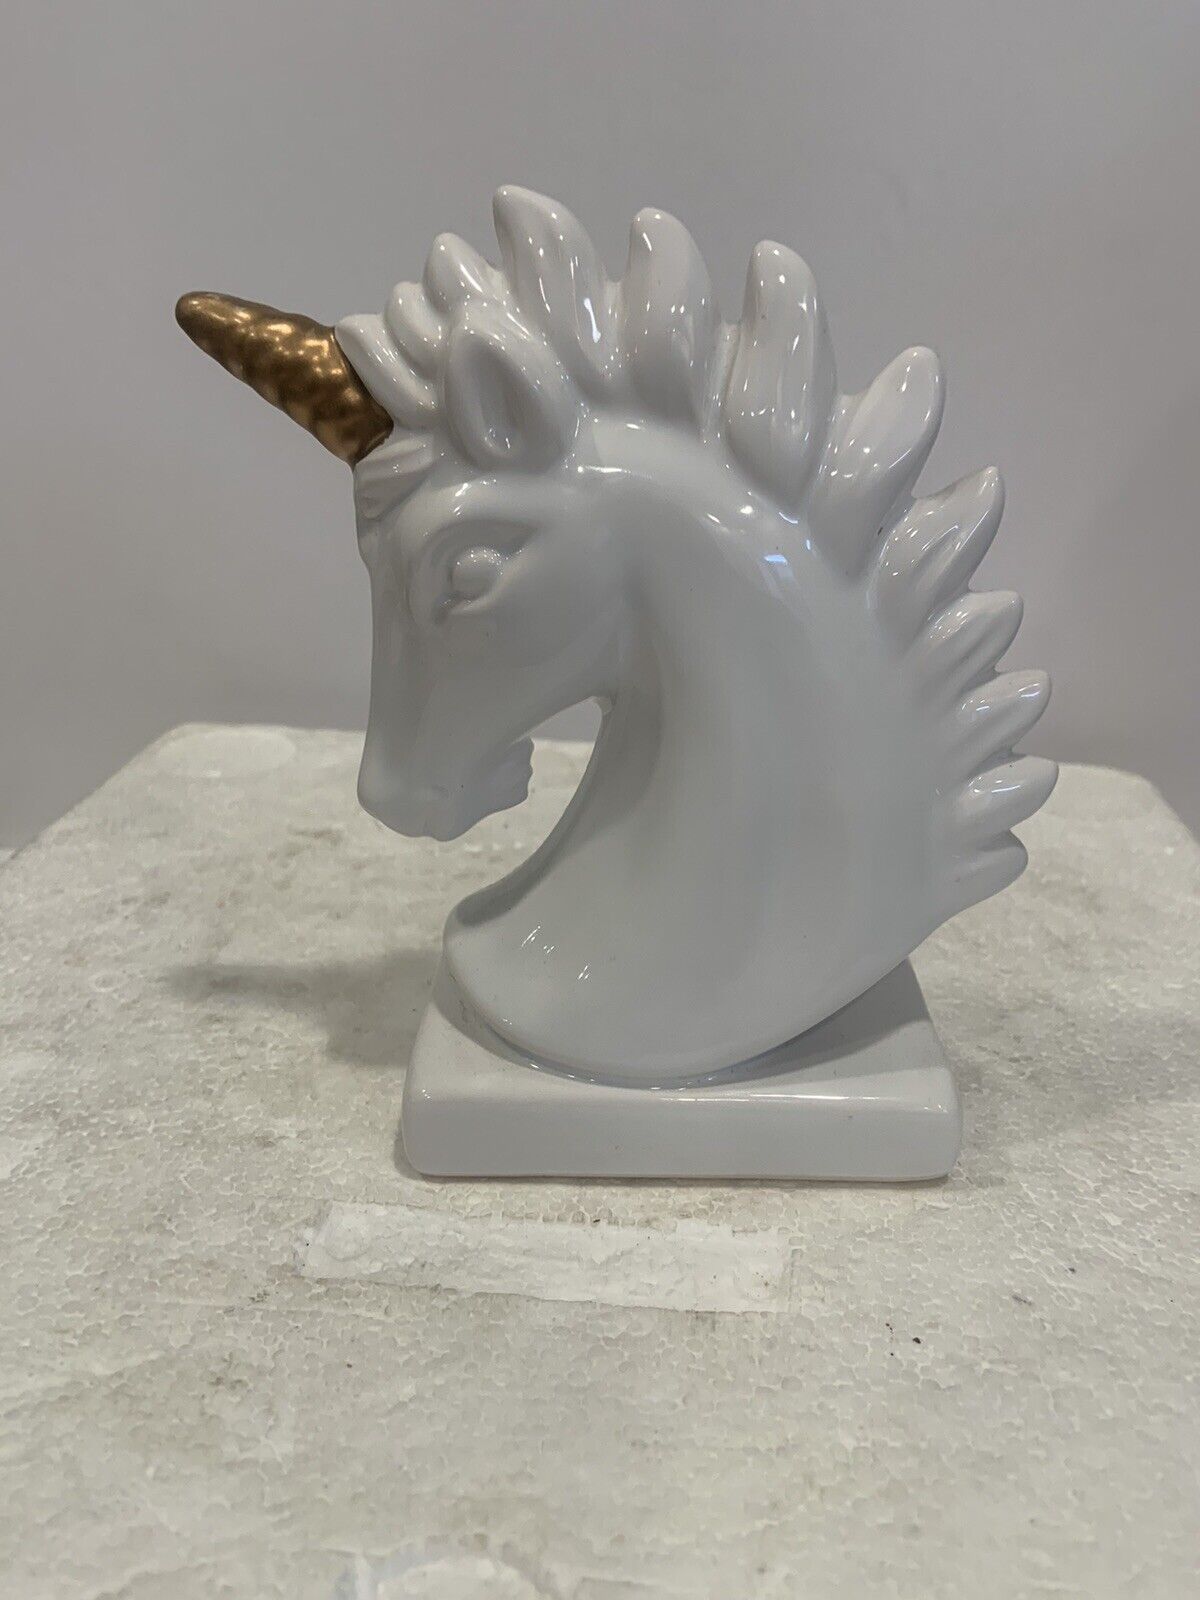 Vntg Porcelain Unicorn Bust White Head Gold Horn Excellent Condition See Photos